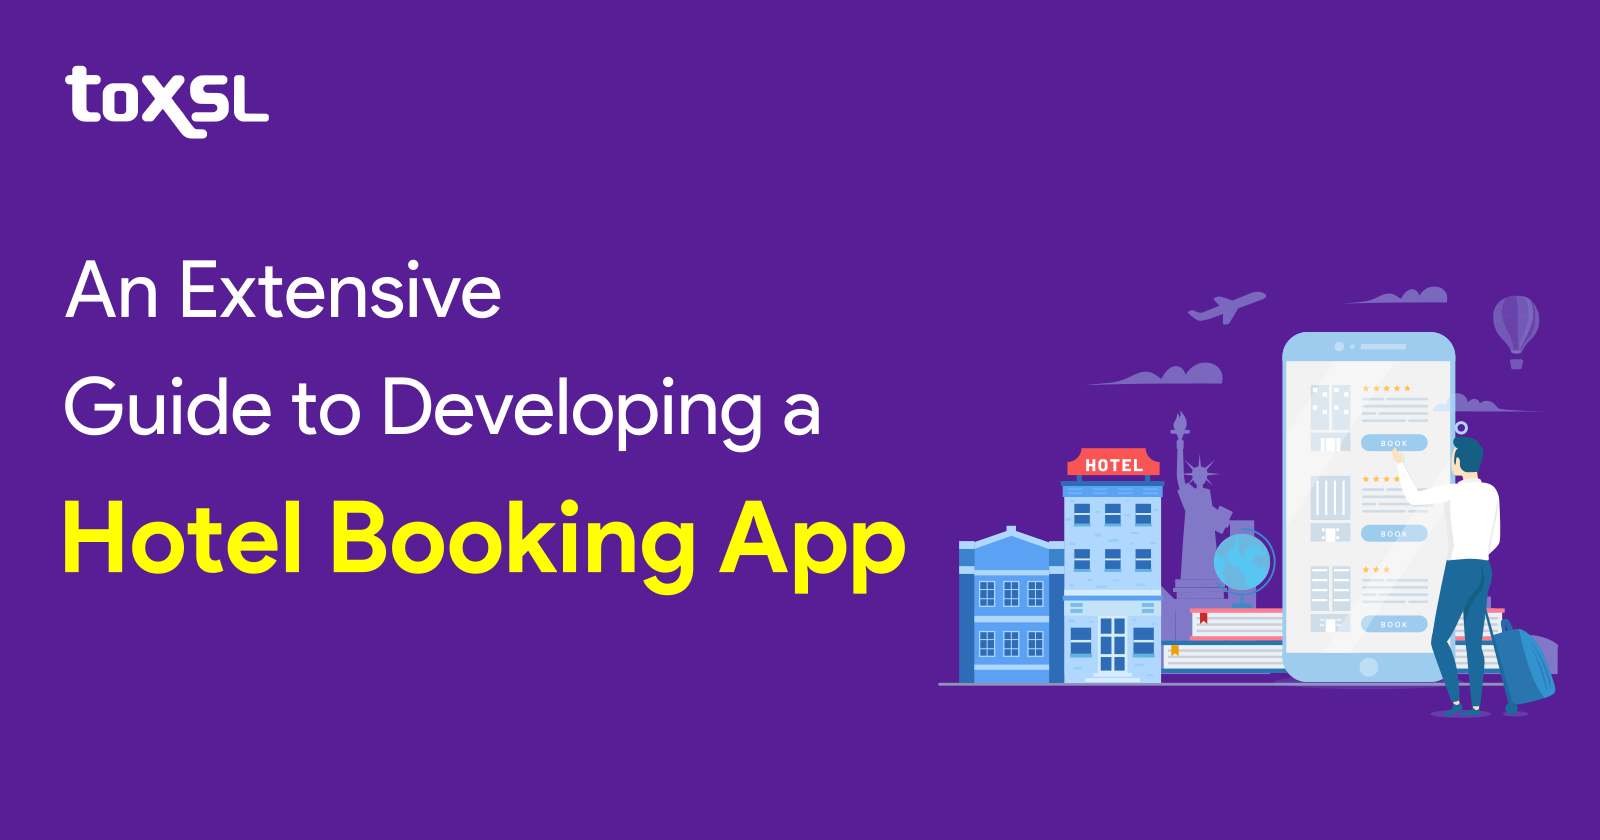 An Extensive Guide to Developing a Hotel Booking App like OYO